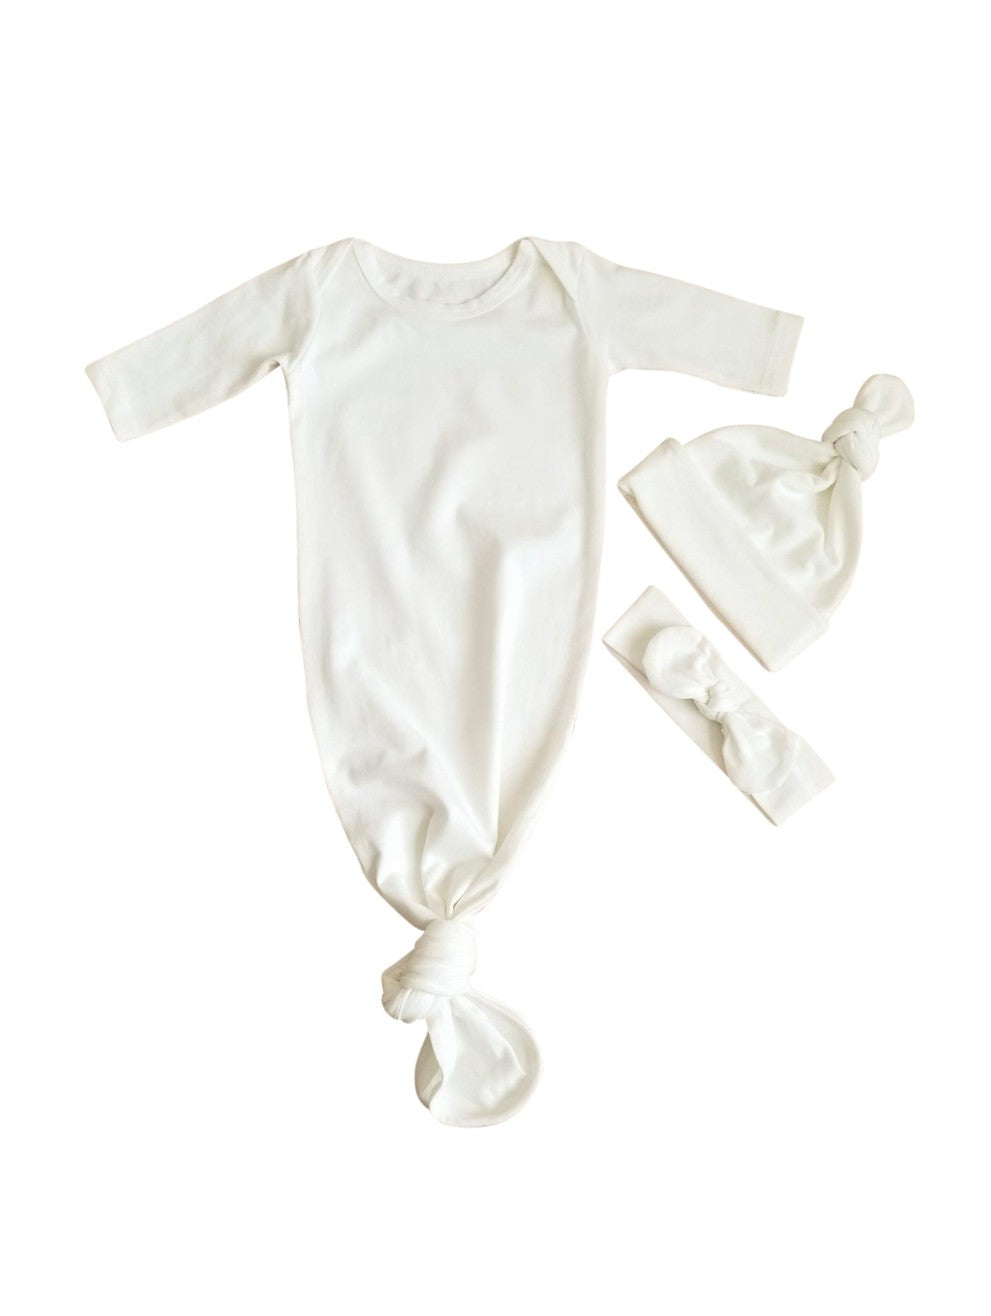 knotted baby boy gown